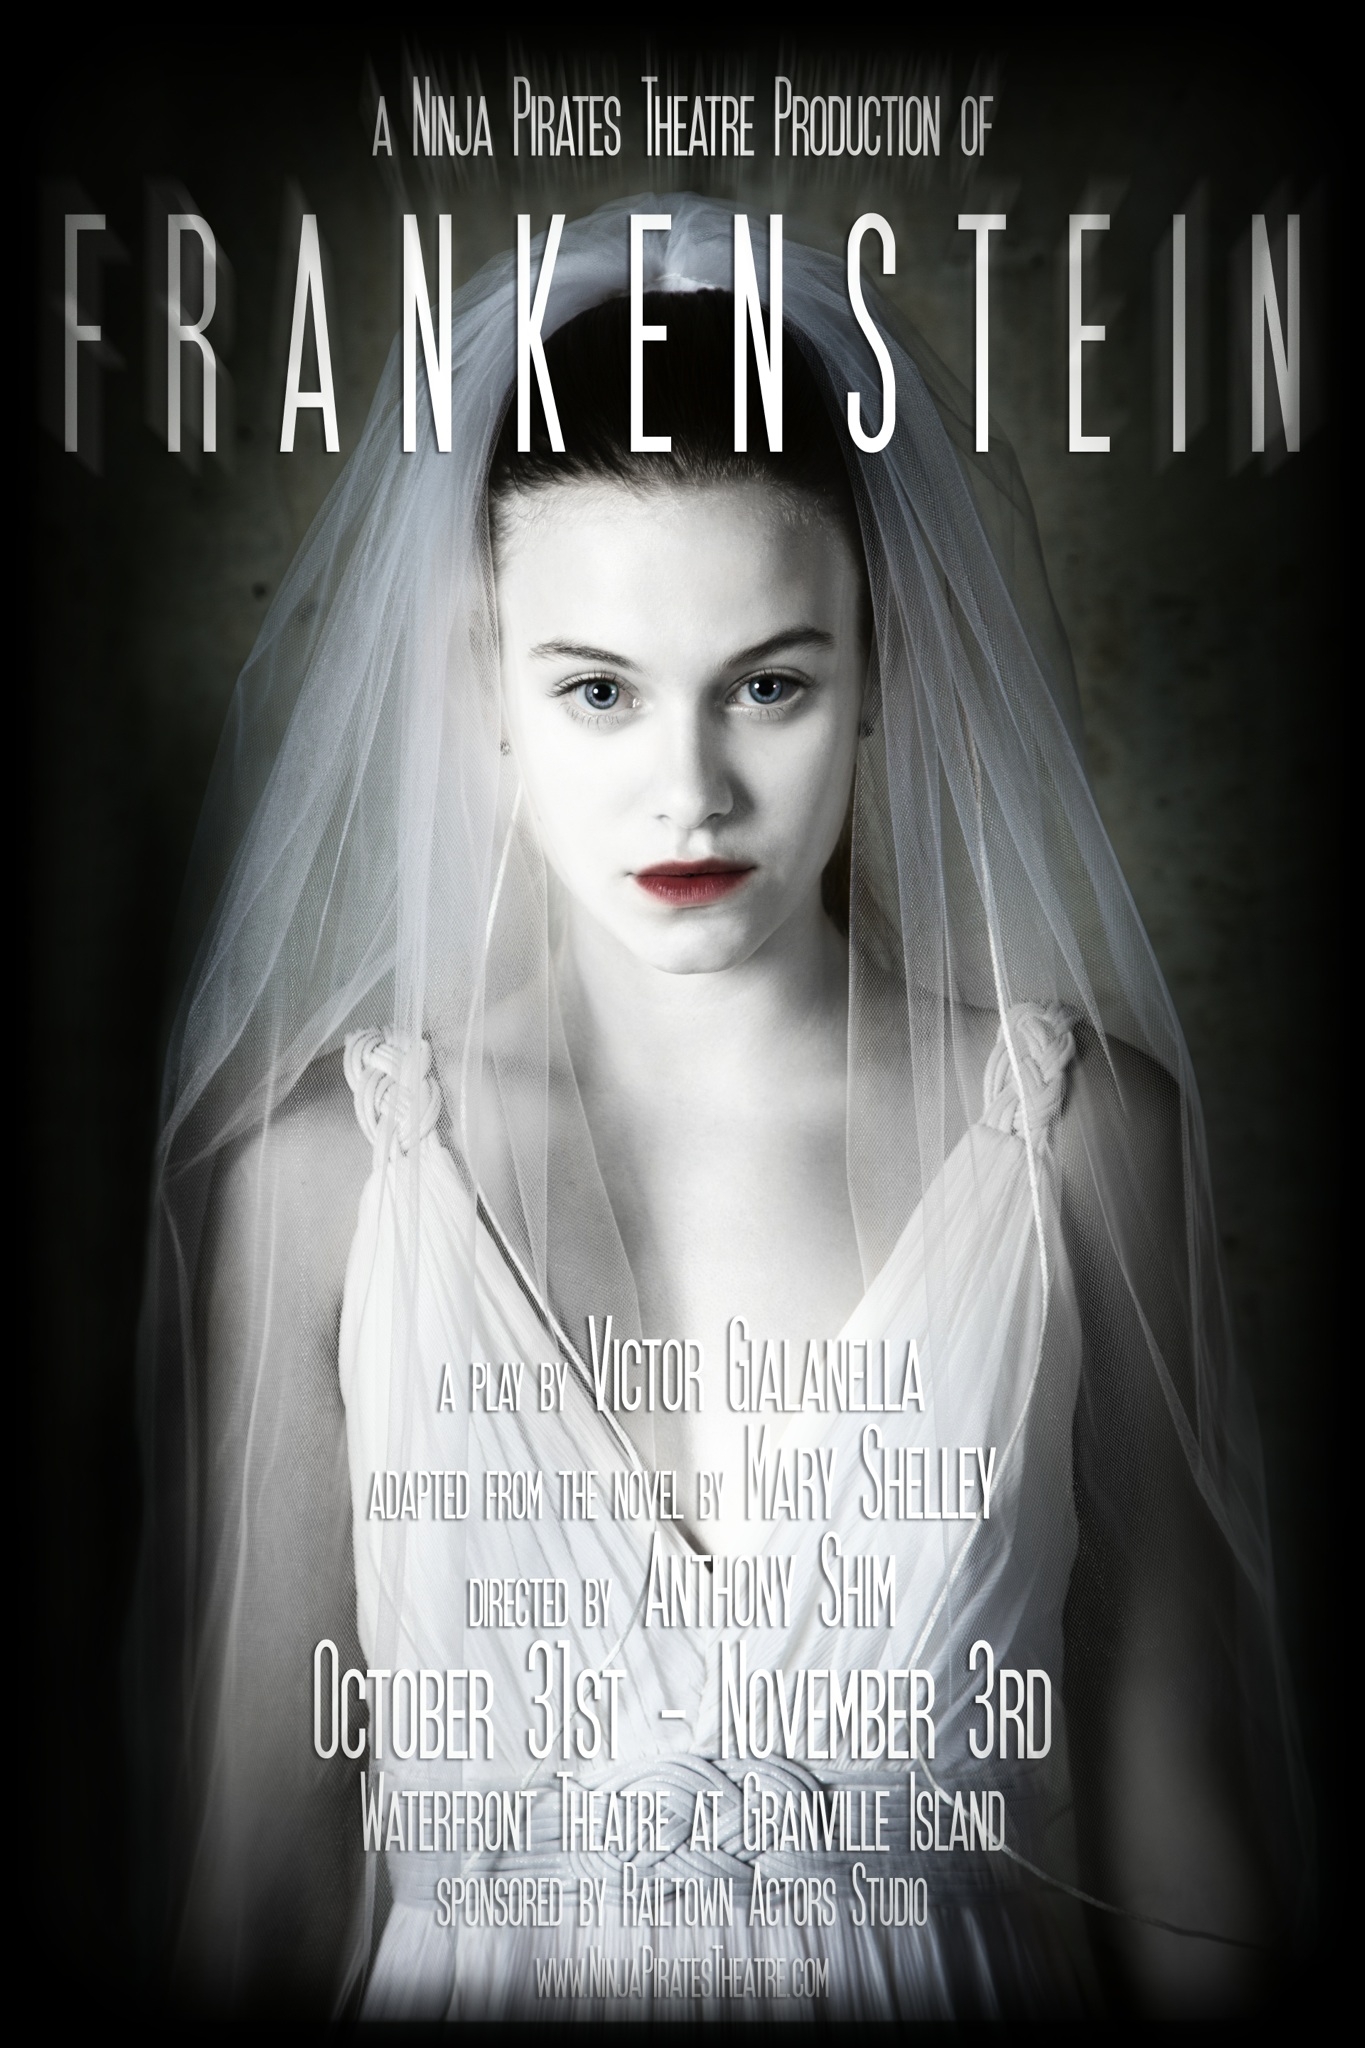 Tiera as the lead Elizabeth in an adaptation of Mary Shelly's Frankenstein.